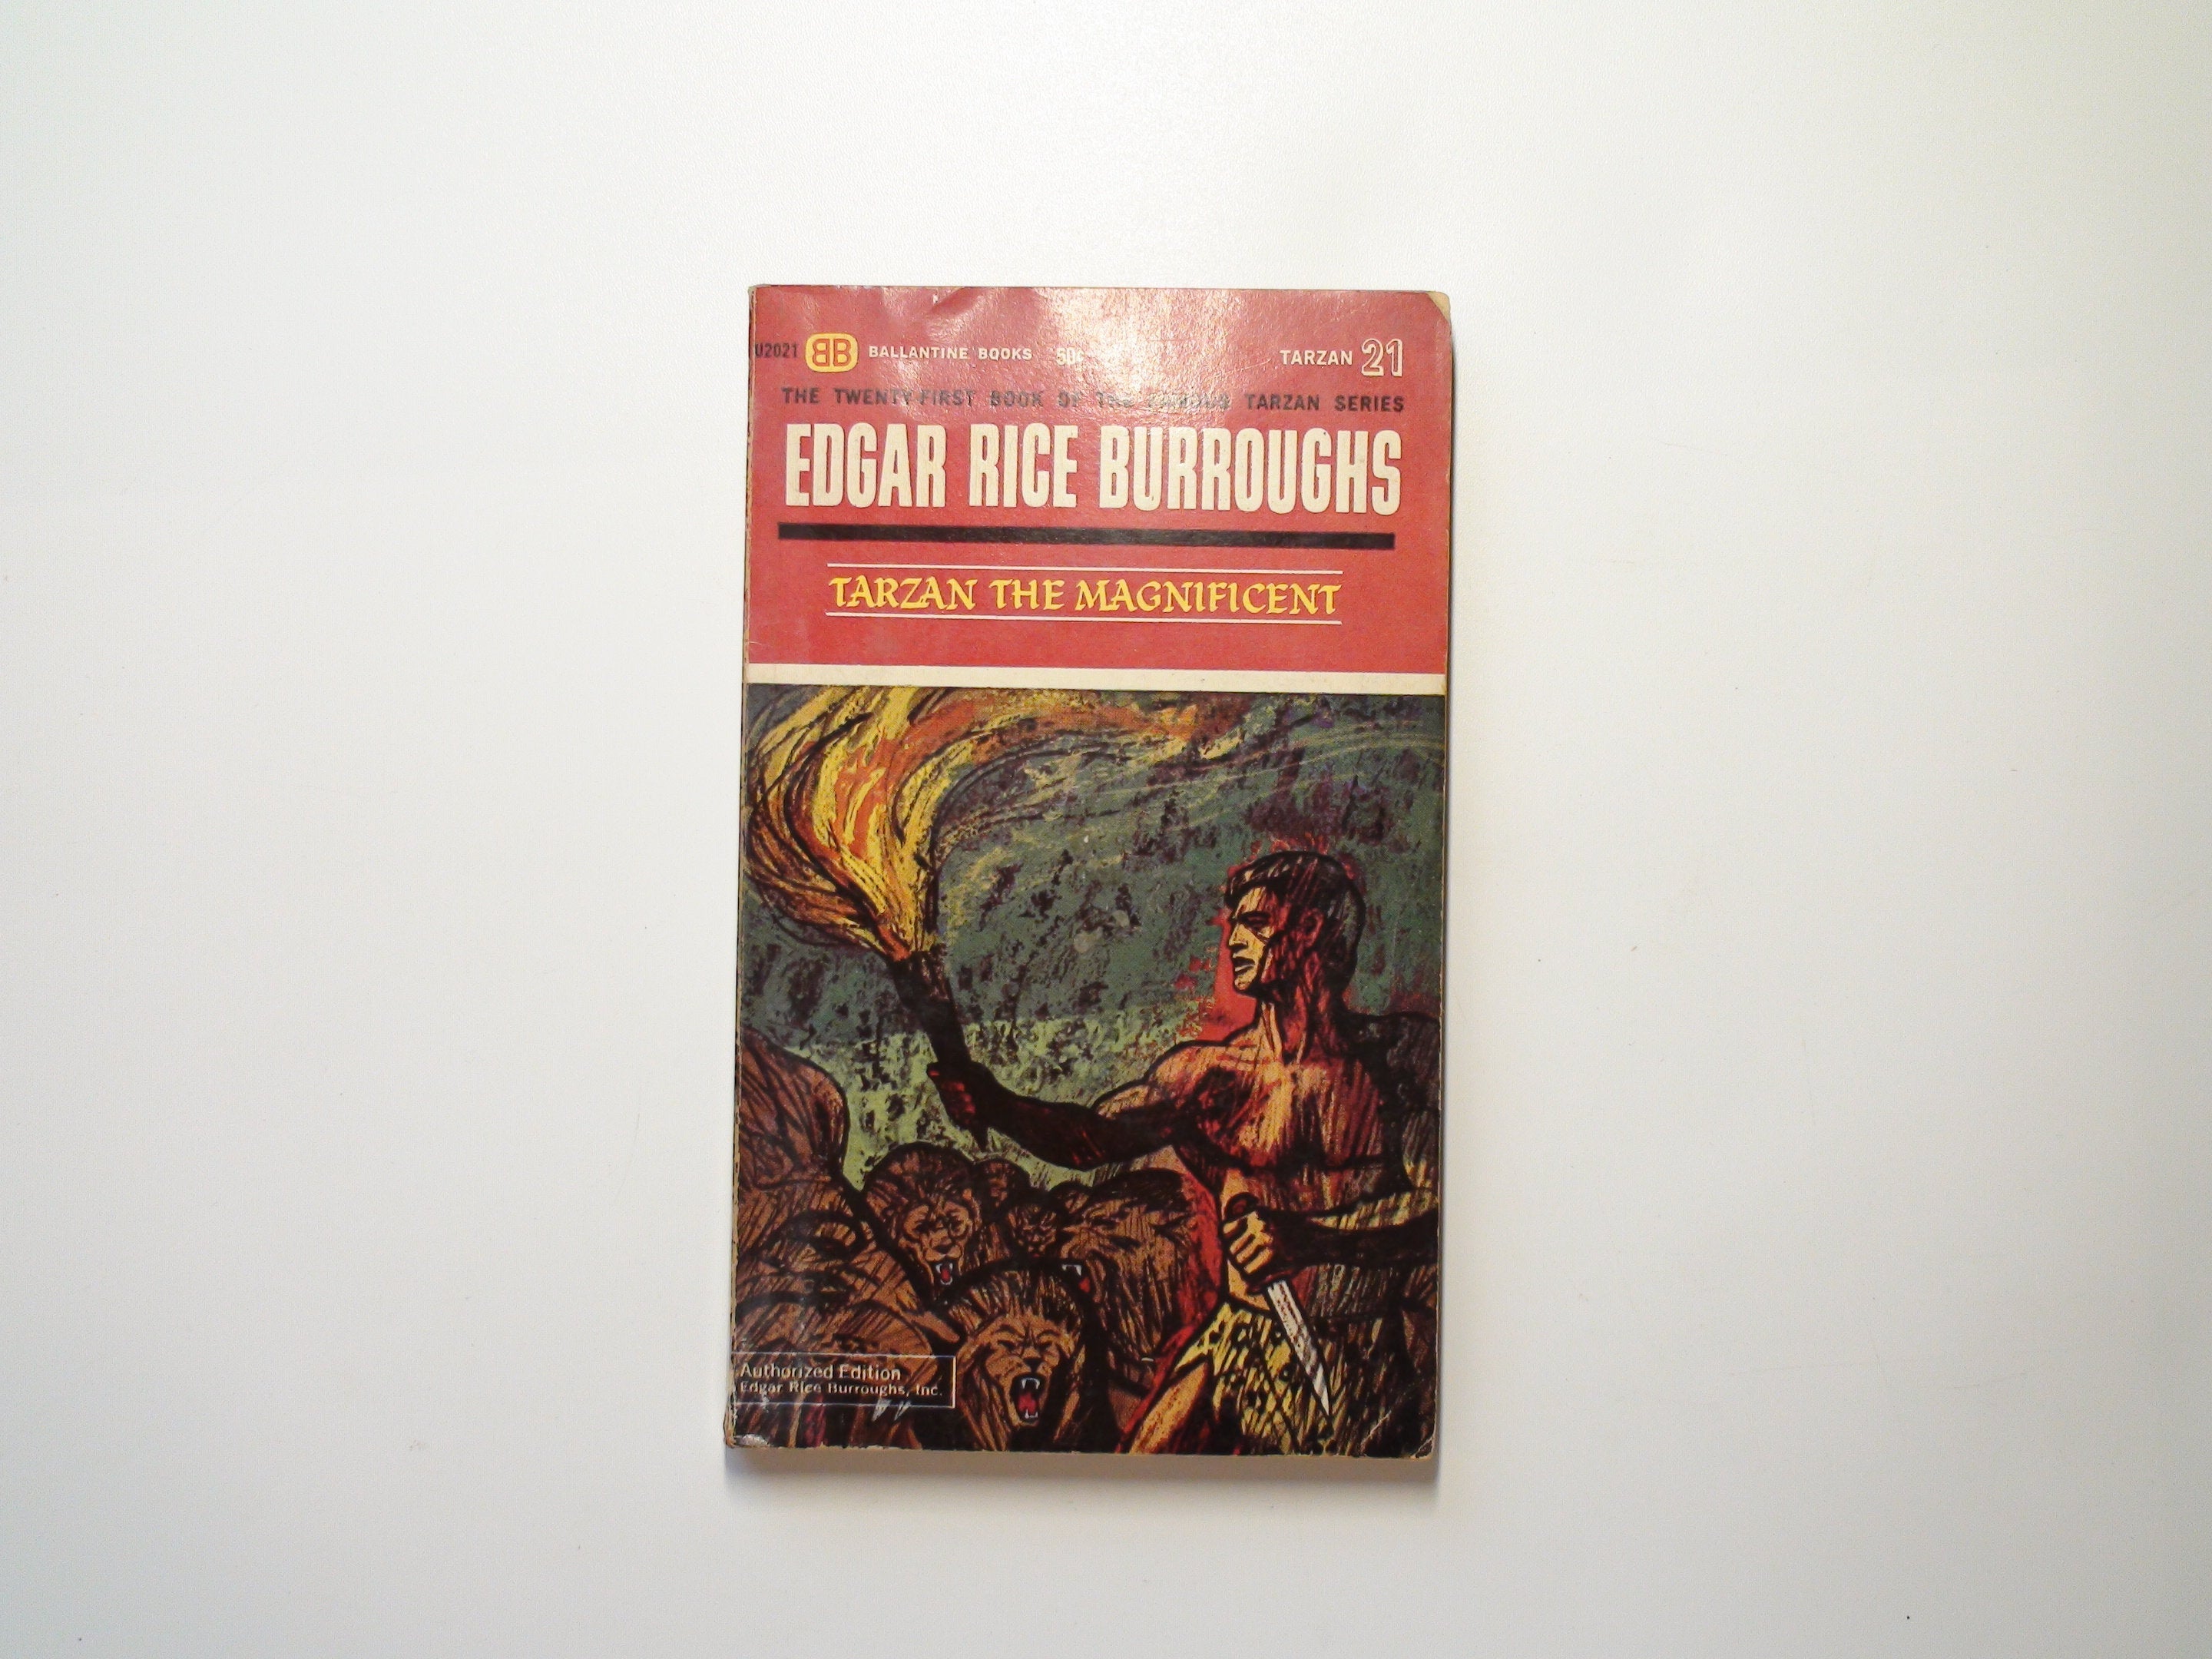 Tarzan the Magnificent, by Edgar Rice Burroughs, Vintage Paperback, 1964